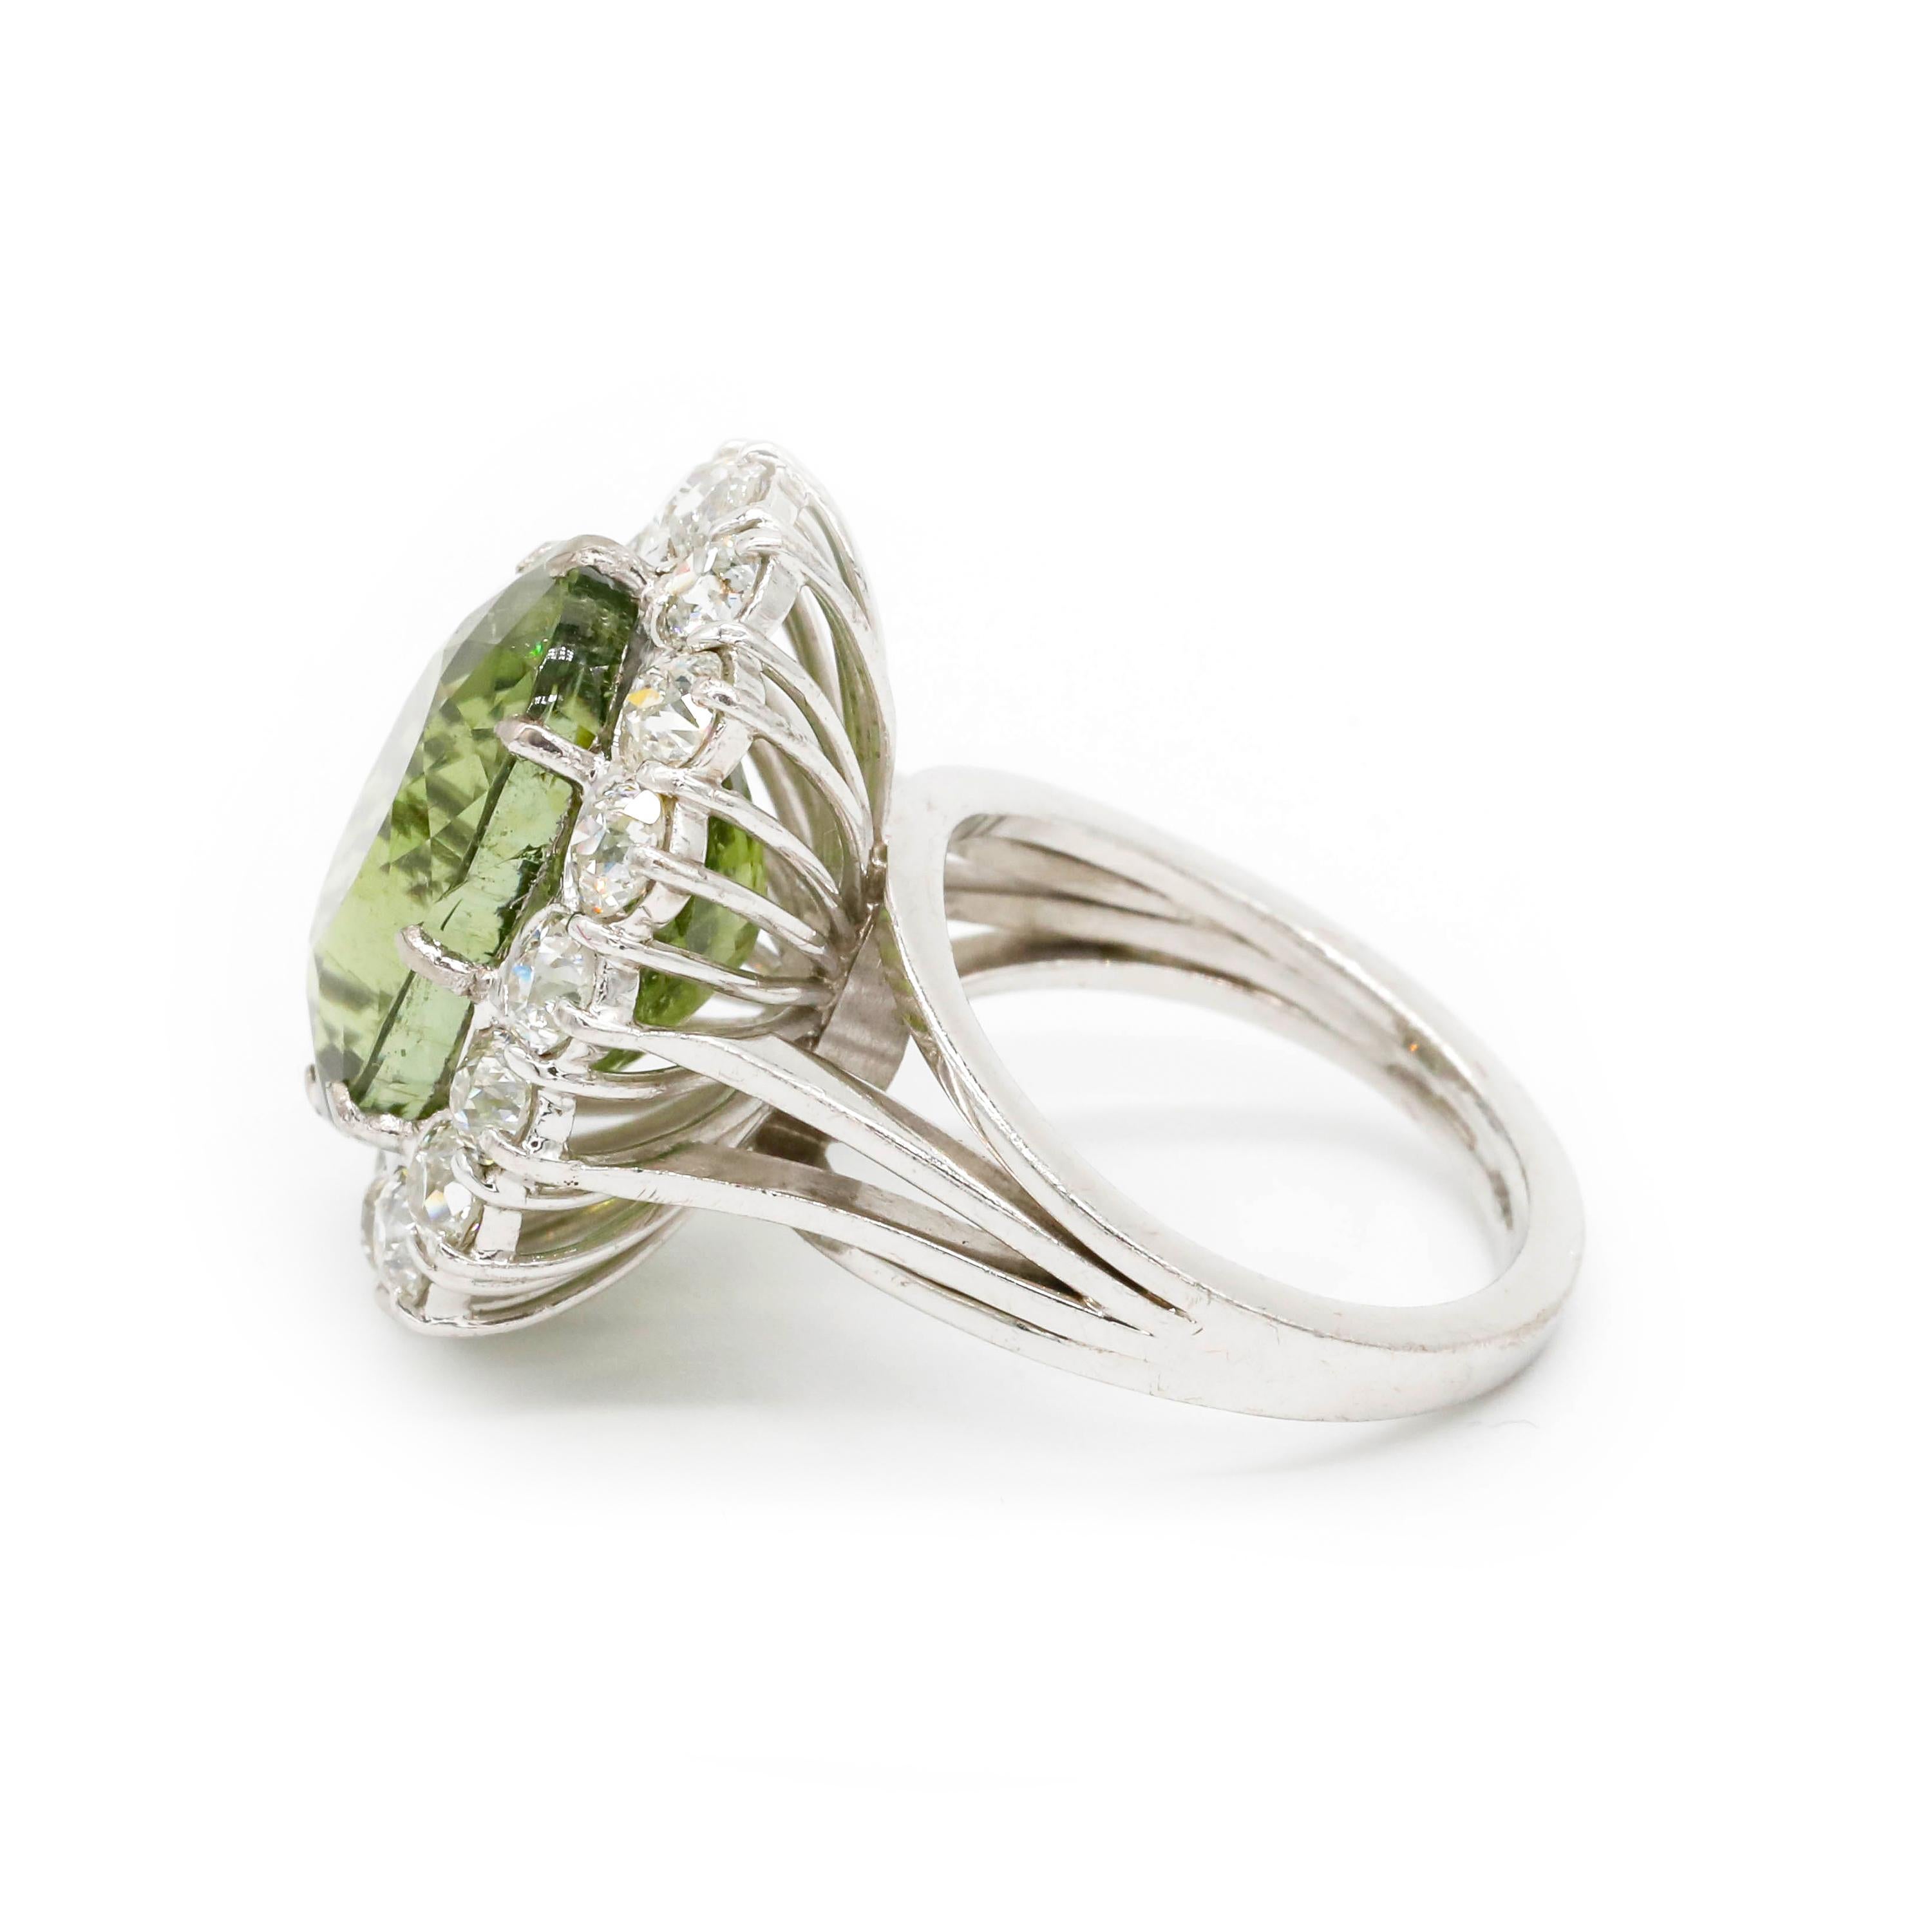 10 Carat Green Tourmaline and Diamond Ring Platinum Solitaire Cocktail Ring

This modern ring features a total of 1.90 carats of diamond round shape and 10.00 carats Green Tourmaline Gemstone Set in Platinum.

We guarantee all products sold and our